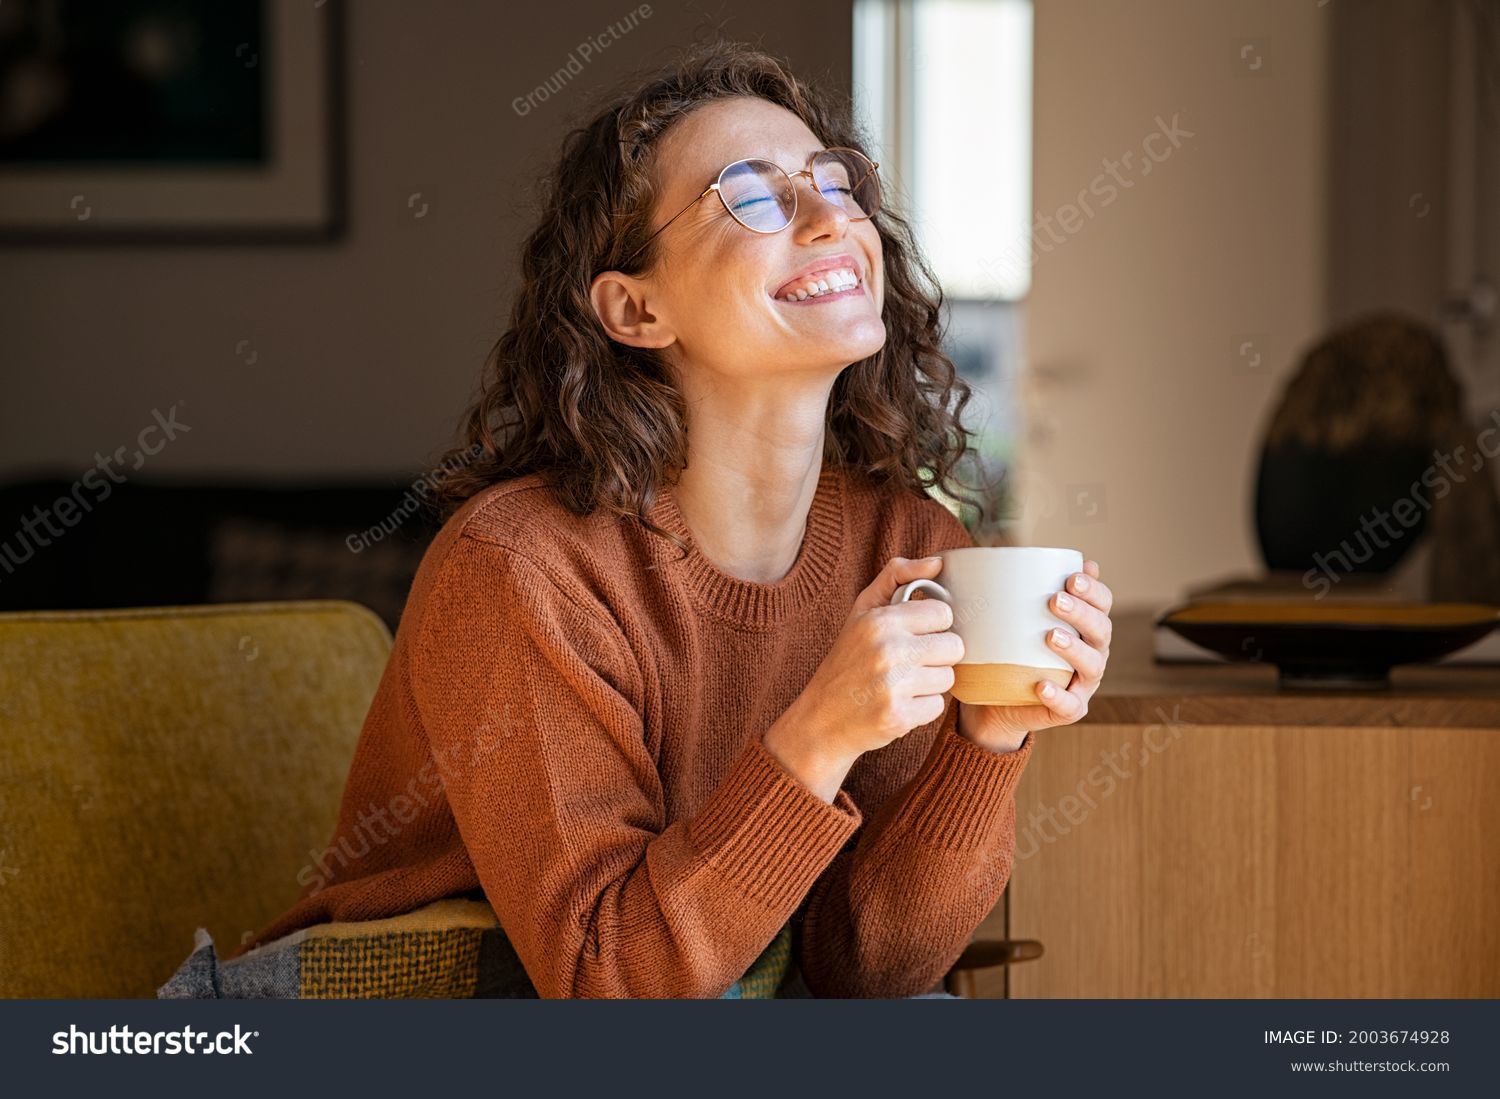 Portrait of joyful young woman enjoying a cup of coffee at home. Smiling pretty girl drinking hot tea in winter. Excited woman wearing spectacles and sweater and laughing in an autumn day. #2003674928